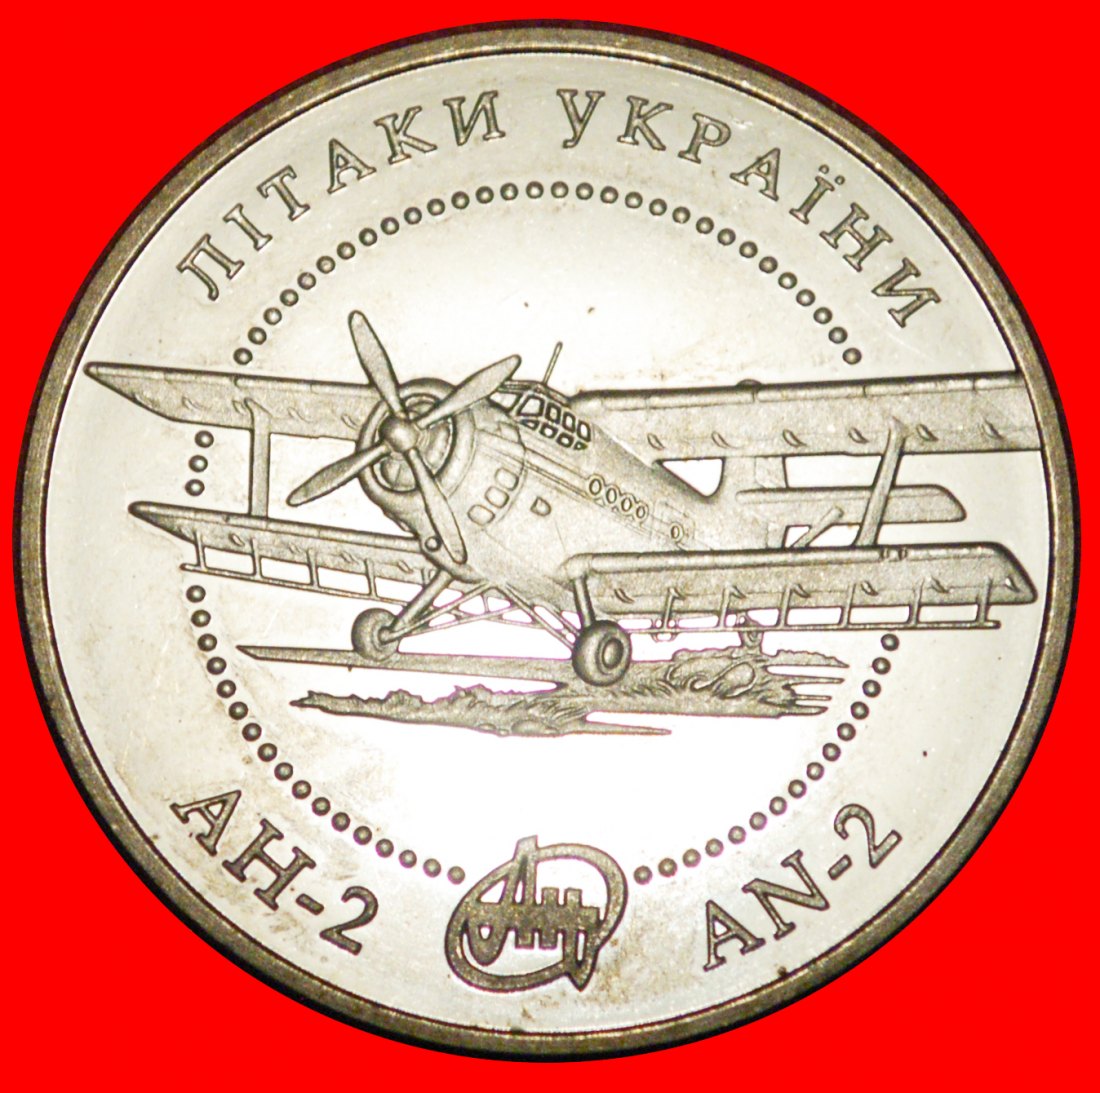  * PLANE AND THE SUN: ukraine (ex. the USSR, russia) ★ 5 GRIVNAS 2003 RARE★LOW START★ NO RESERVE!   